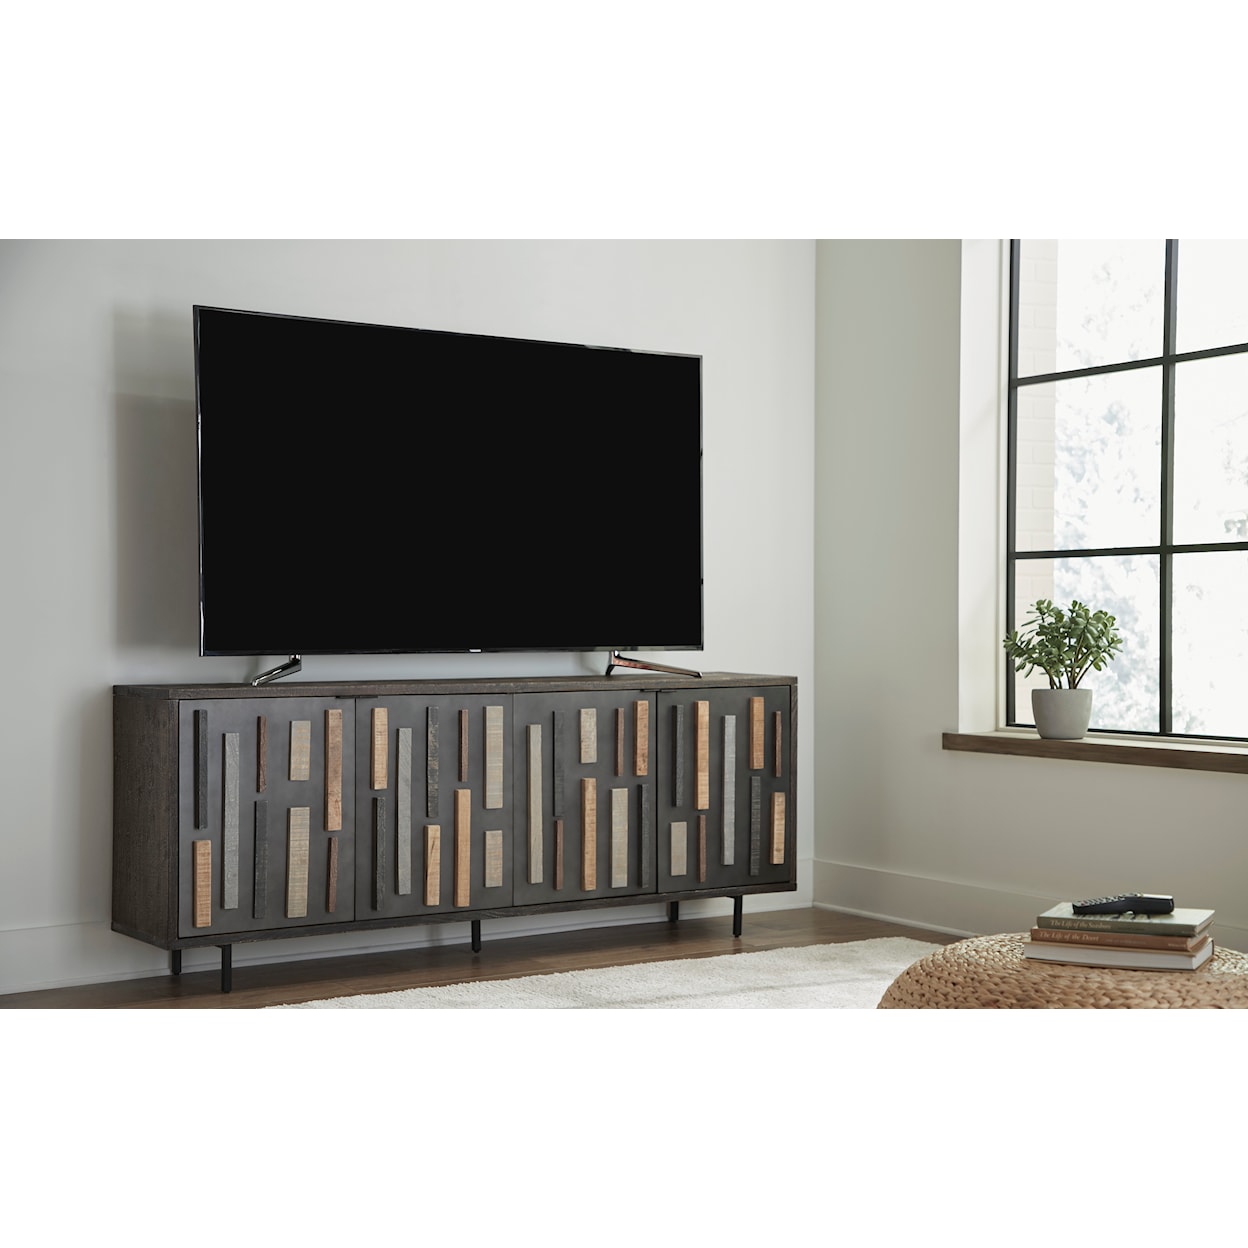 Benchcraft Franchester Accent Cabinet